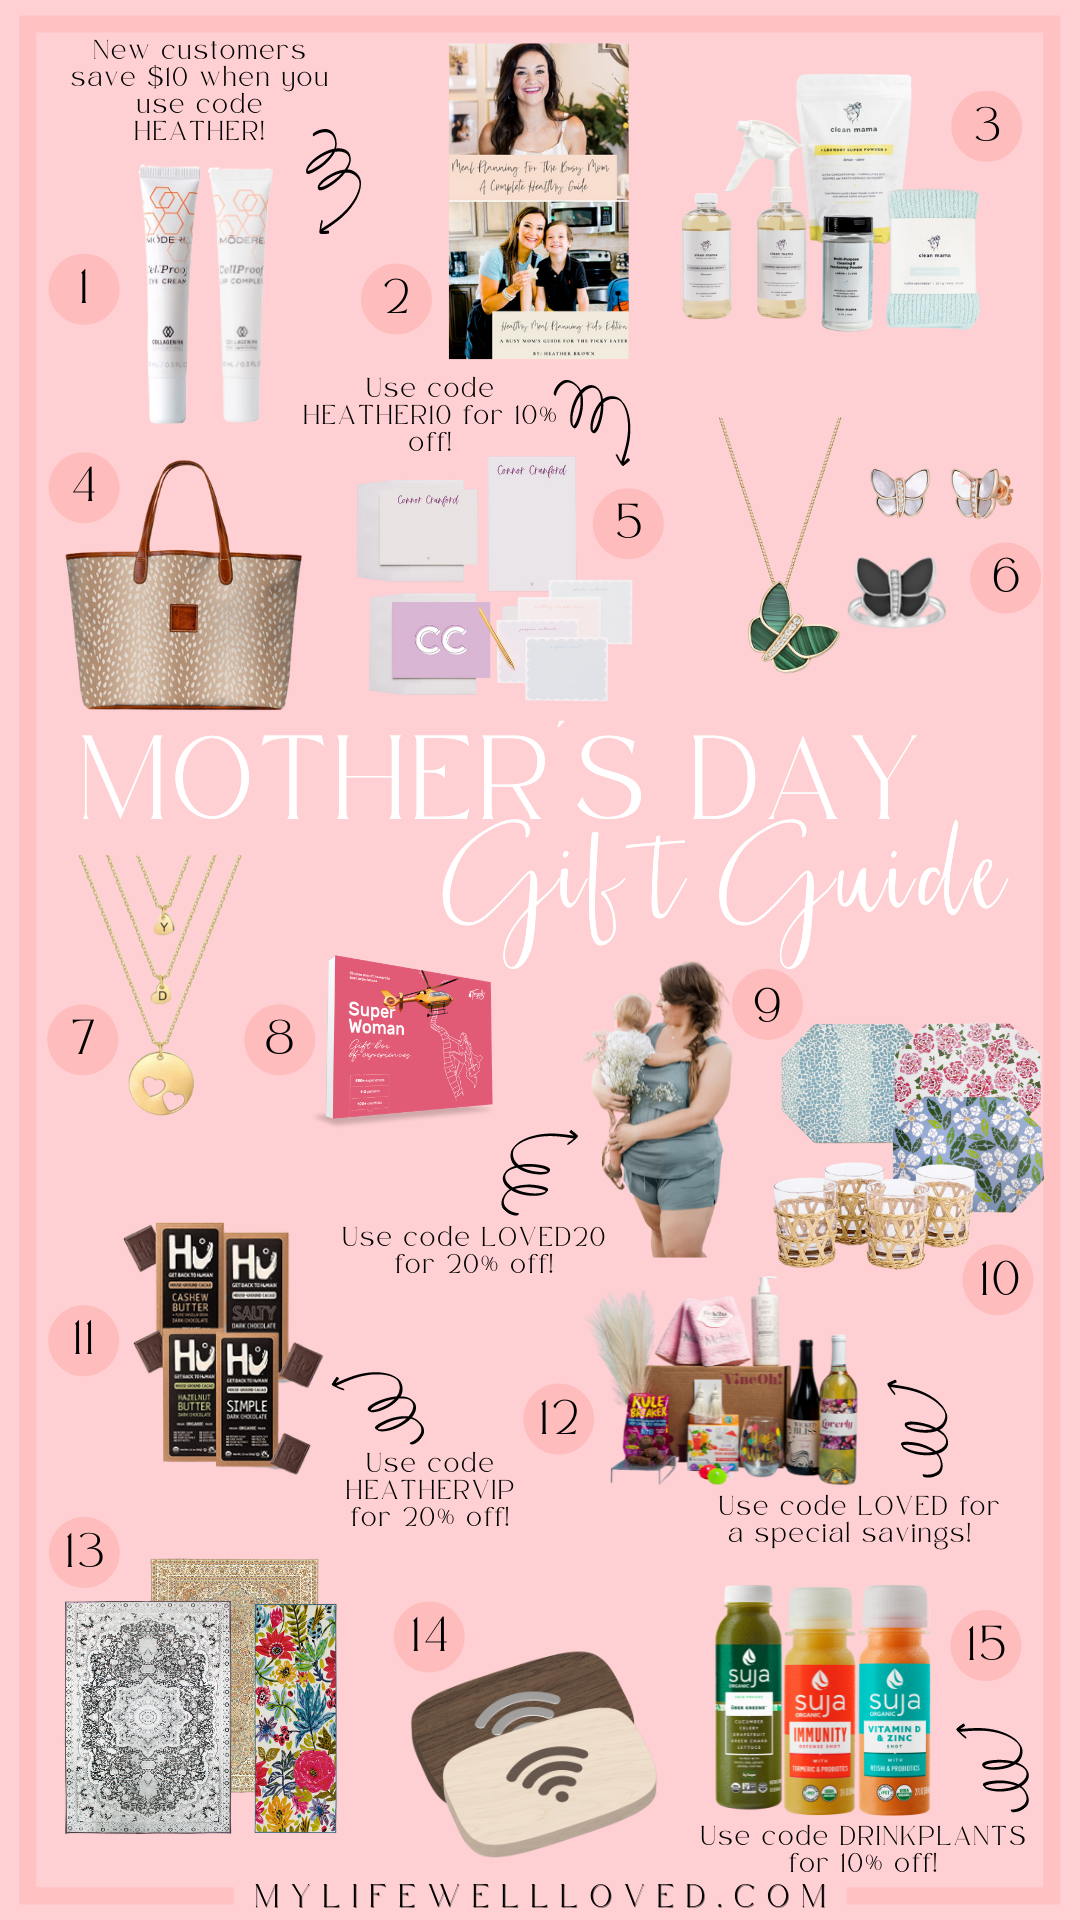 Top 25+ Unique Mother's Day Gifts - Healthy By Heather Brown